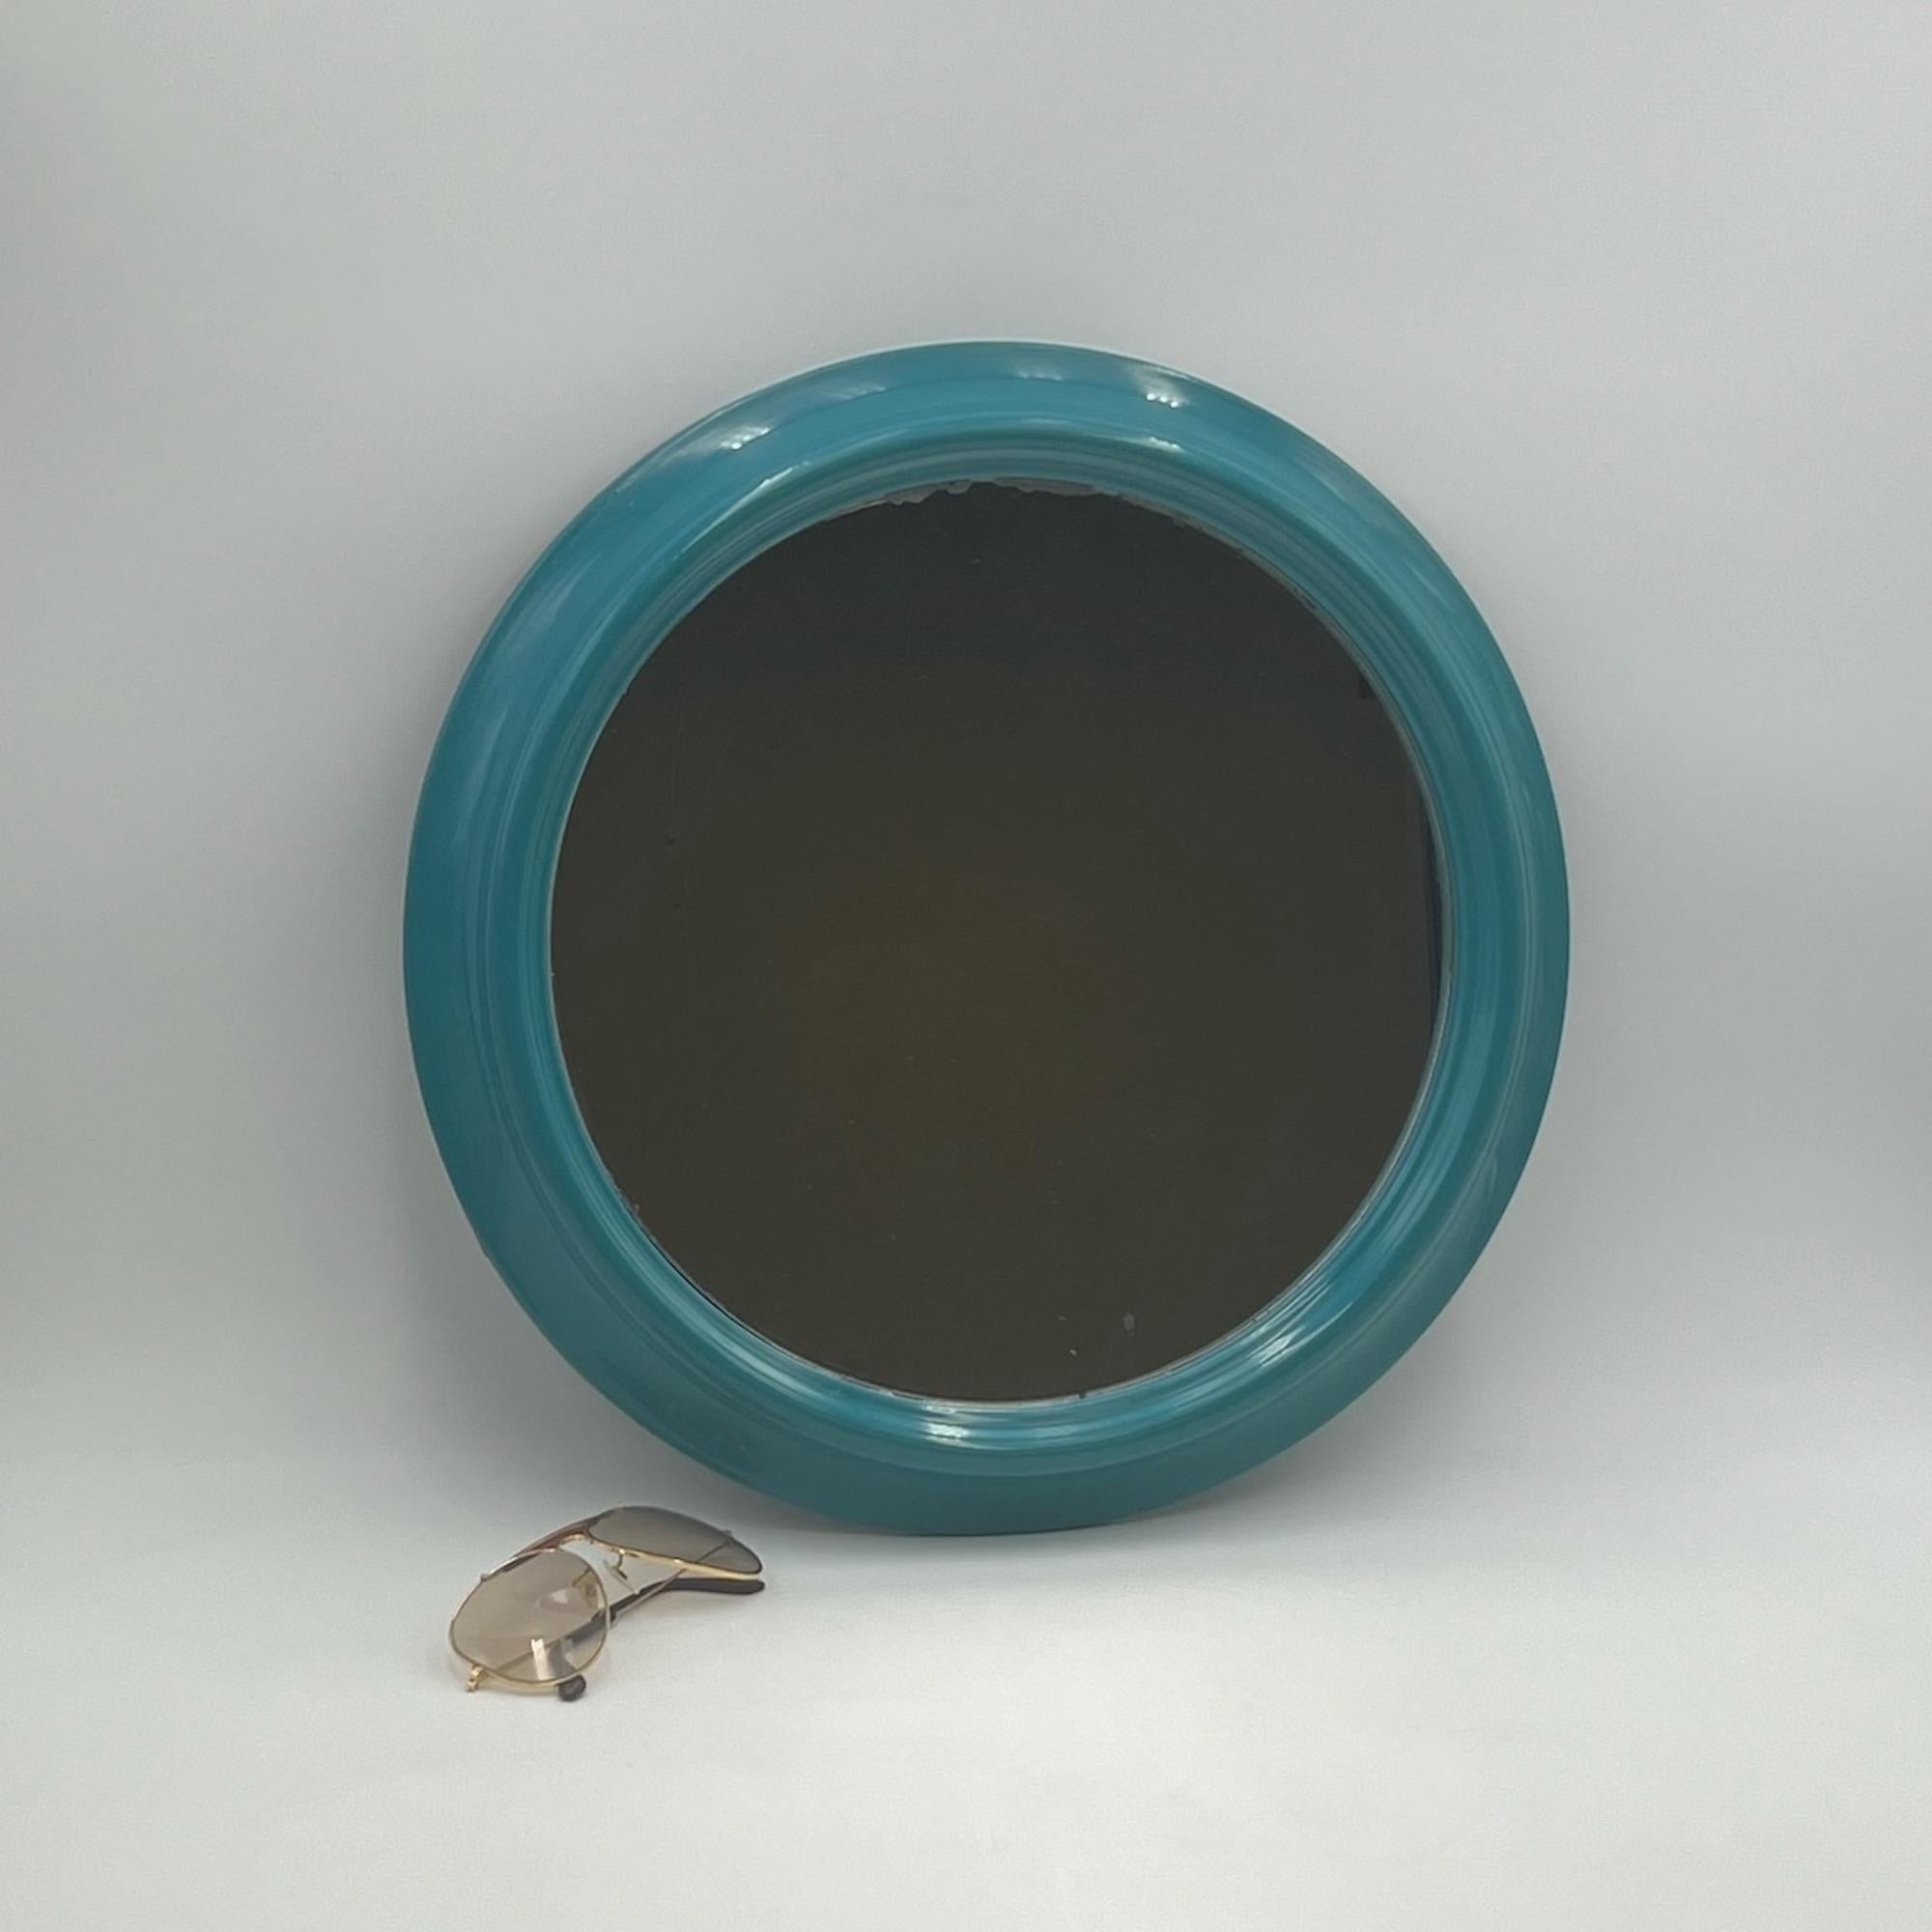 Plastic Vintage Round Wall Mirror in Turquoise Blue Made in Italy, 1970s For Sale